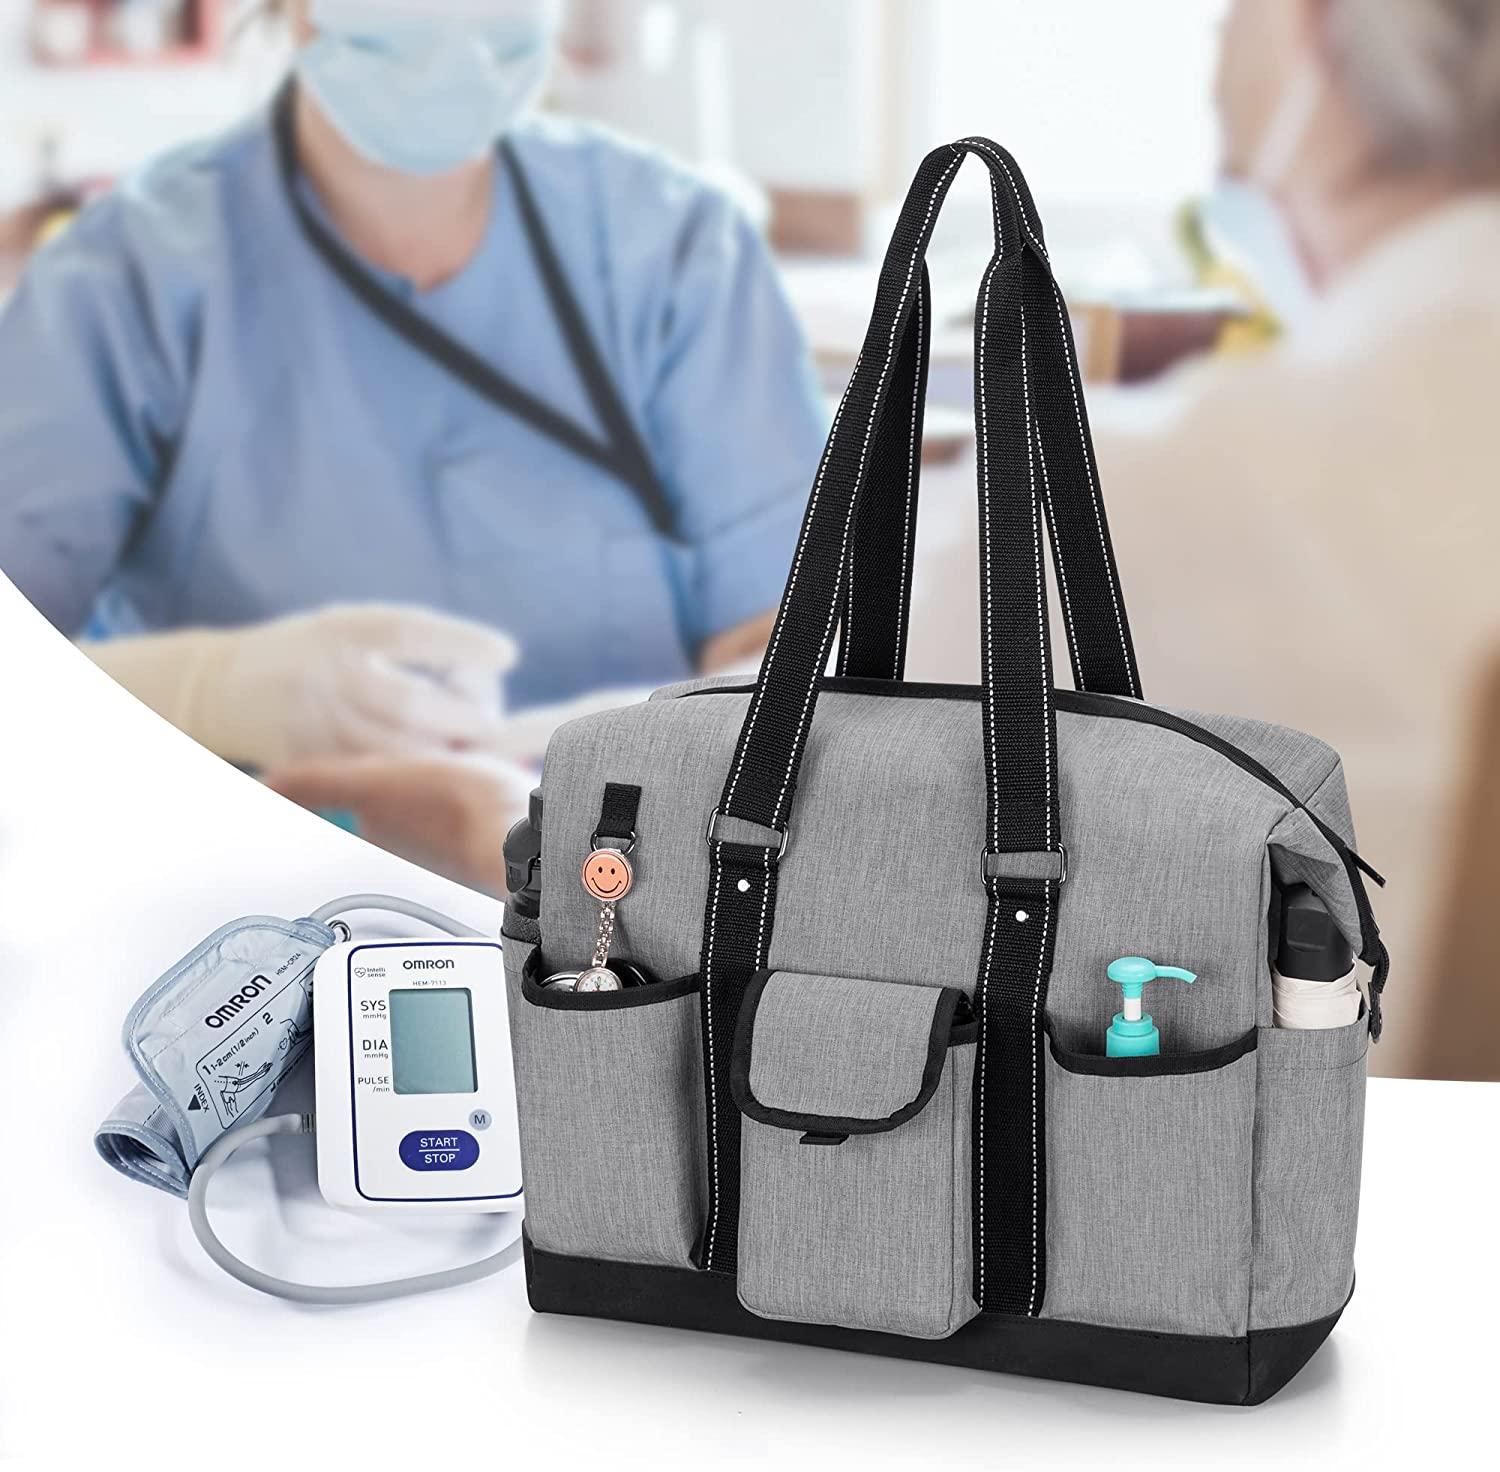  Damero Nurse Tote Bags with Organizer Insert Bag, Medical  Supplies Bags with Laptop Sleeve for Home Care Nurse, Medical Students and  More, Black : Clothing, Shoes & Jewelry